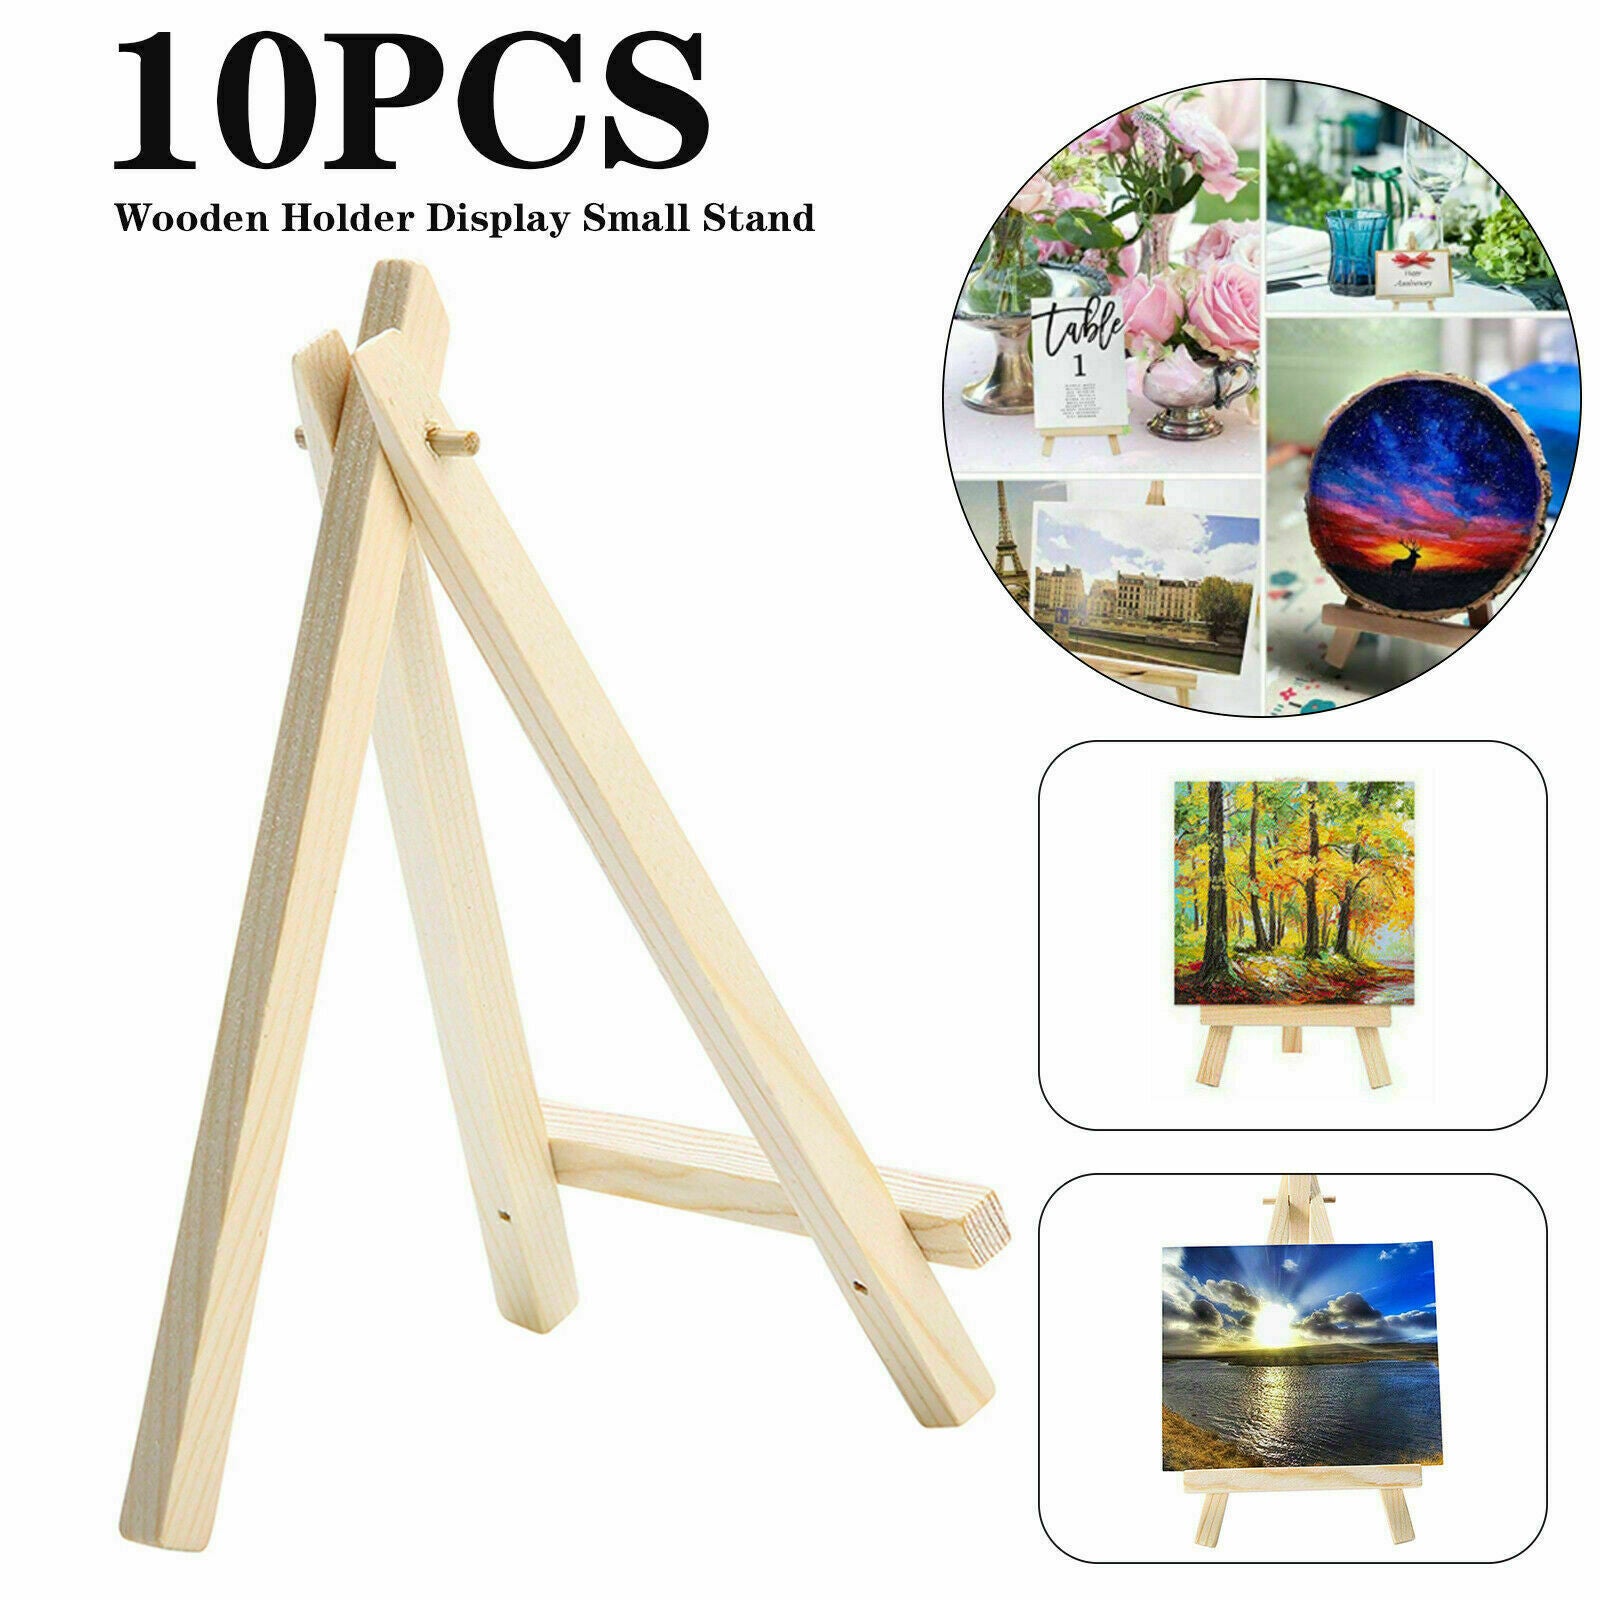 10pcs/set Mini Wooden Easel Wood Artist Easels Display Stand Art Painting Canvas